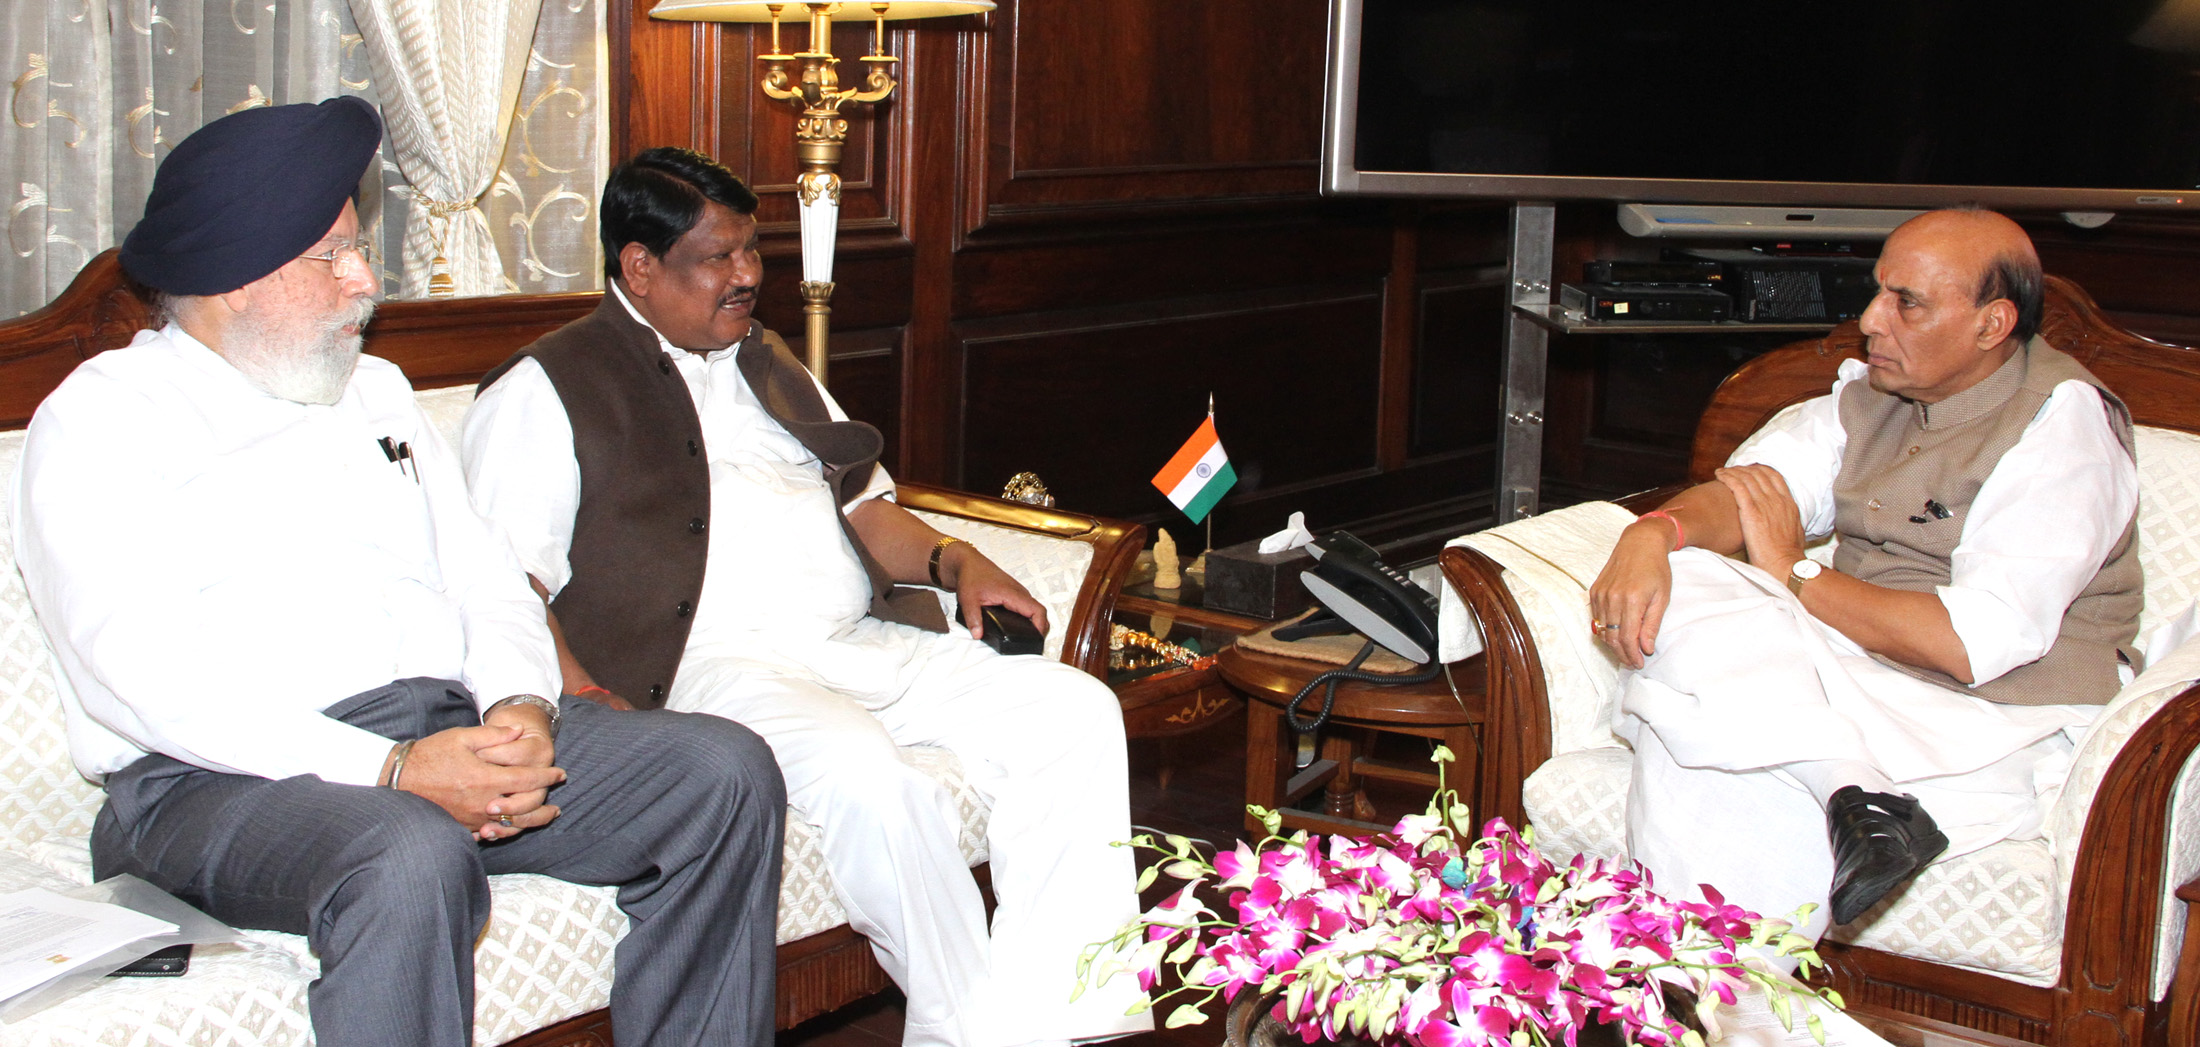 The Union Minister for Tribal Affairs, Shri Jual Oram calling on the Union Home Minister, Shri Rajnath Singh, in New Delhi on March 04, 2016. 	The Member of Parliament, Shri S.S. Ahluwalia is also seen.